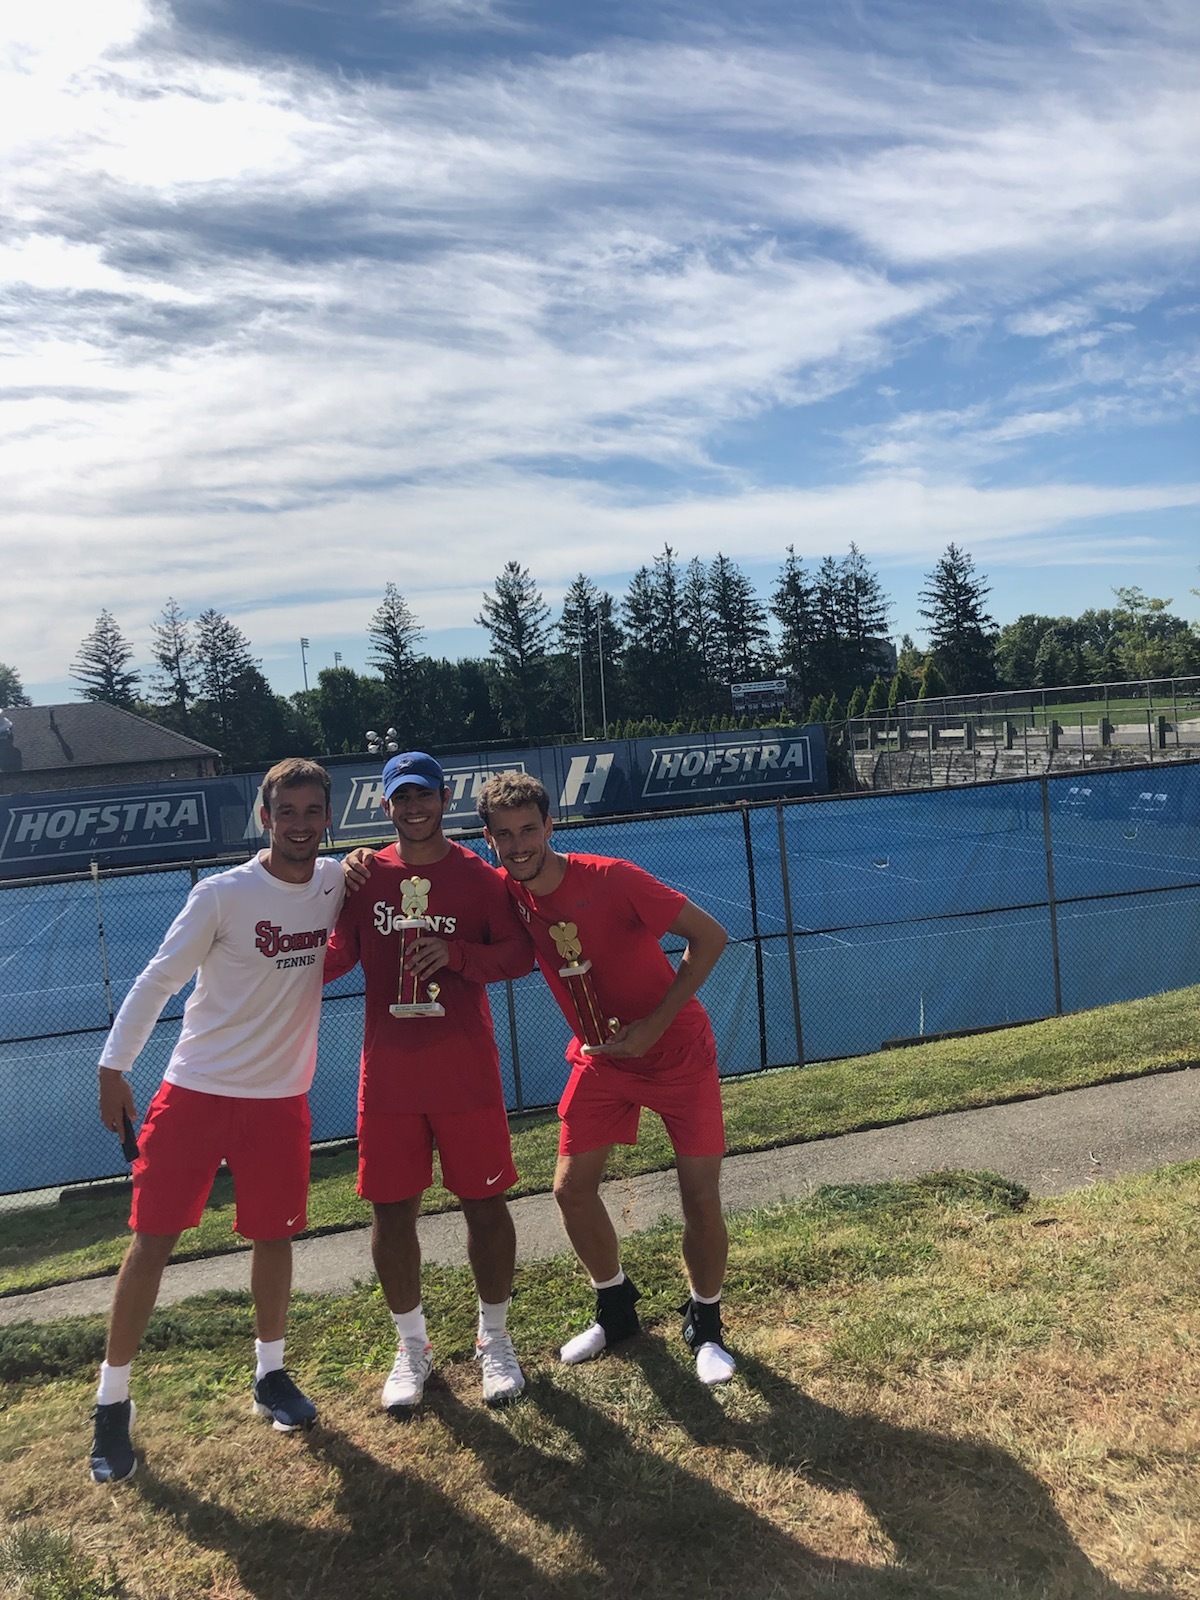 Dillon Pottish, standing directly behind the Big East sign with the Big East Championship trophy, along with Richard Sipala, standing to Pottish's right, helped lead the St. John's men's tennis team this past season as head and assistant coaches.